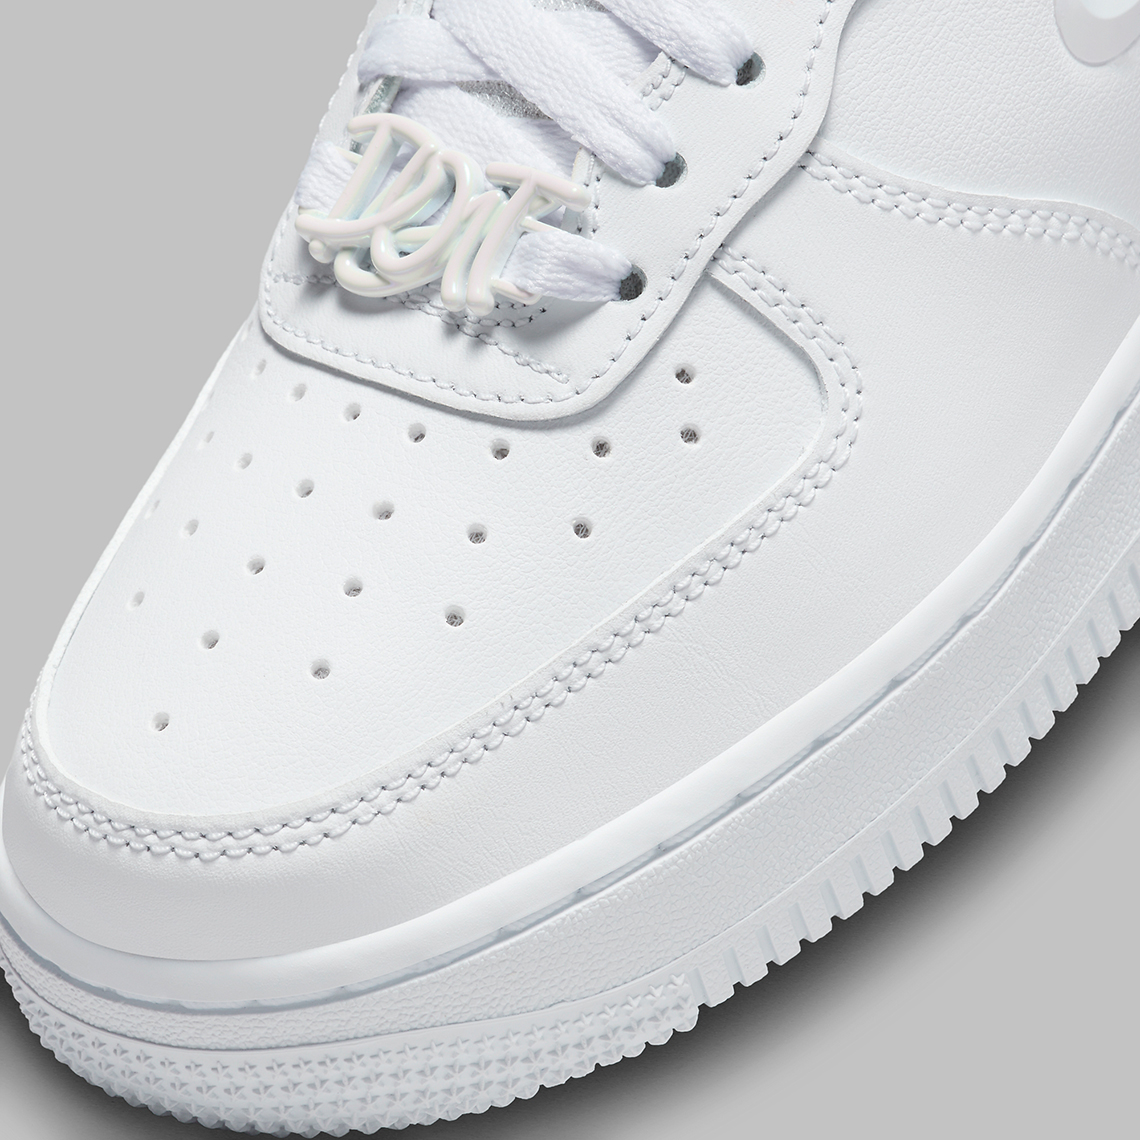 Nike Air Force 1 Low WMNS Just Do It 